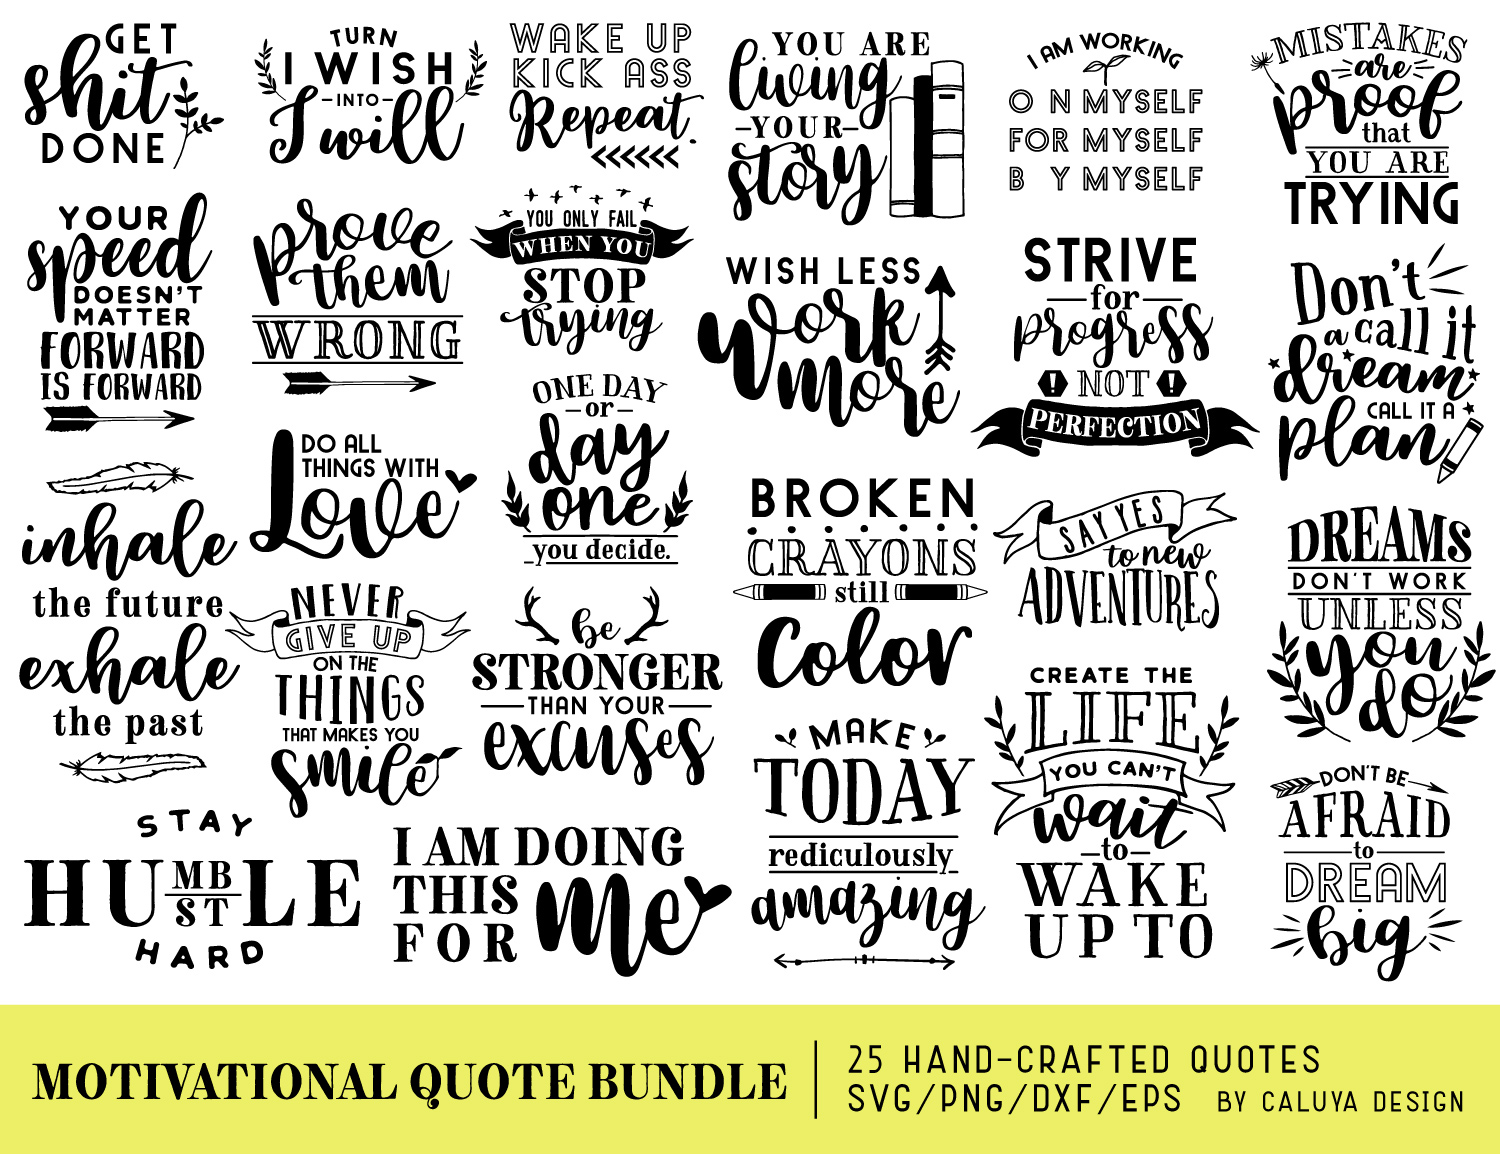 Design life  thumbnail with impressive quotes.